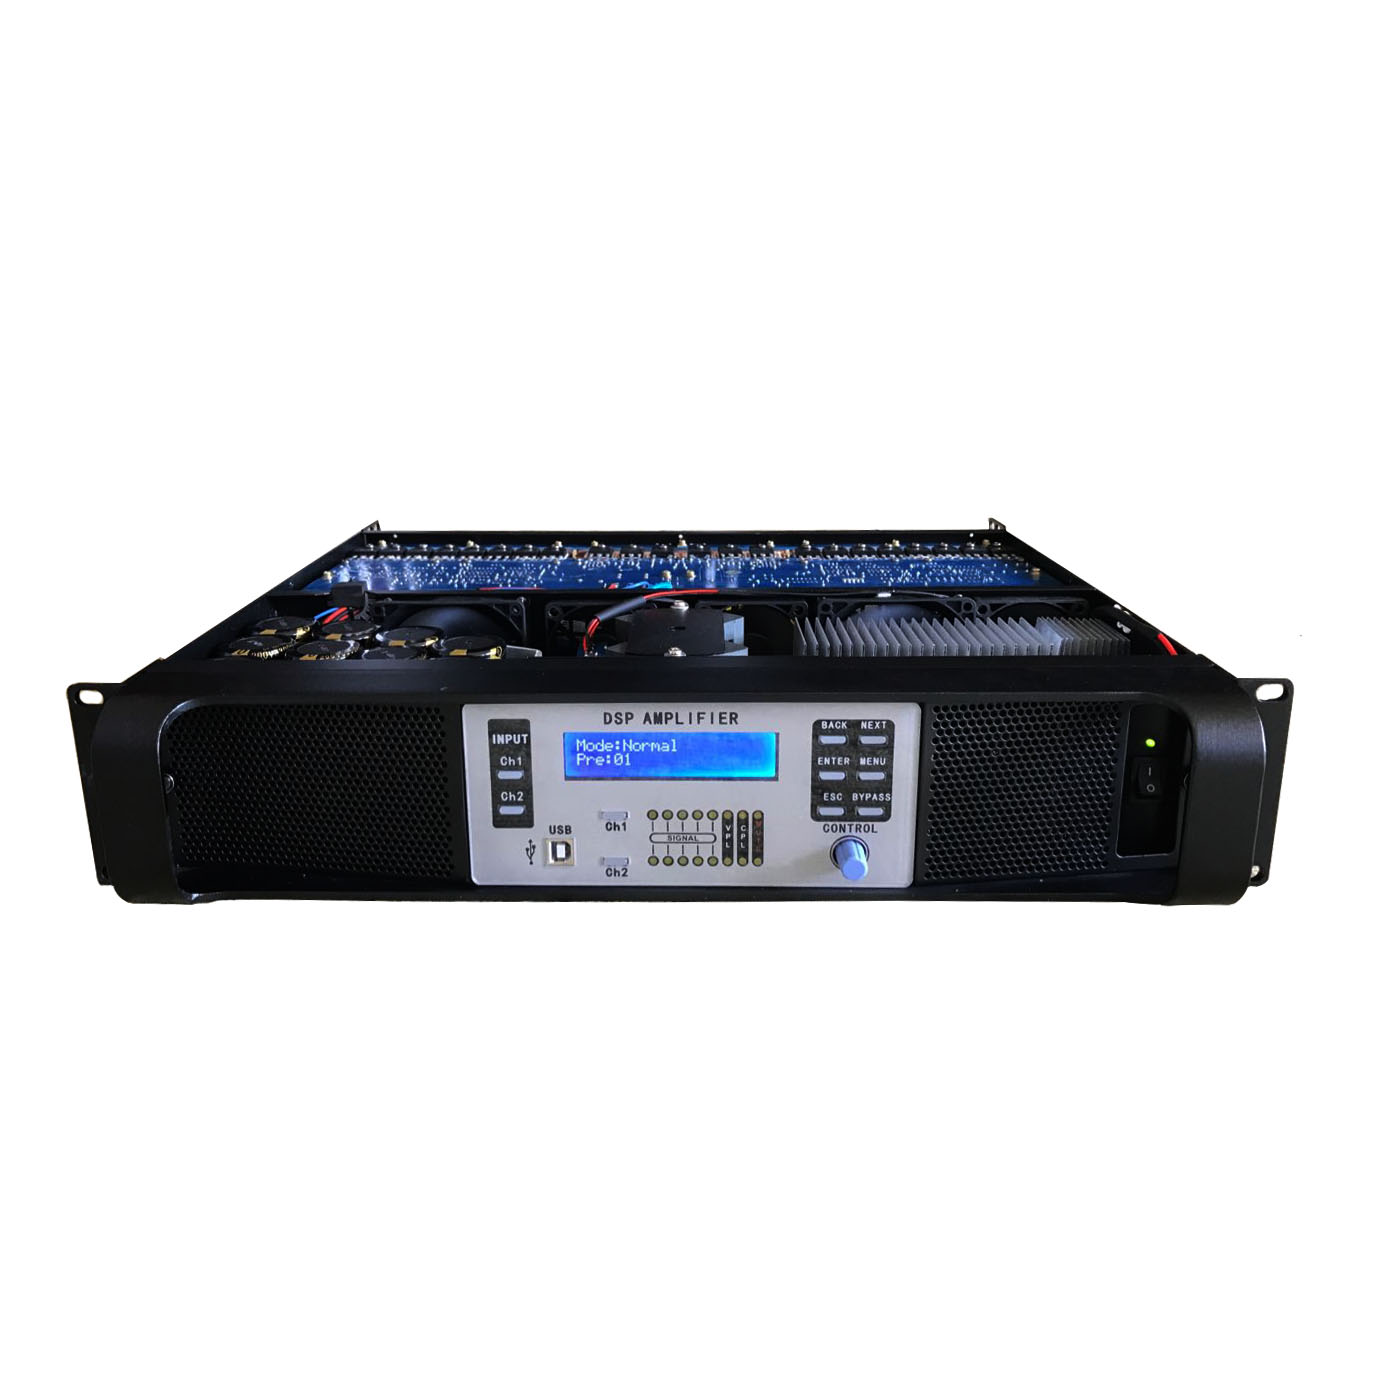 DSP-14K 2 Channel Digital Professional Amplifier with Ethernet 